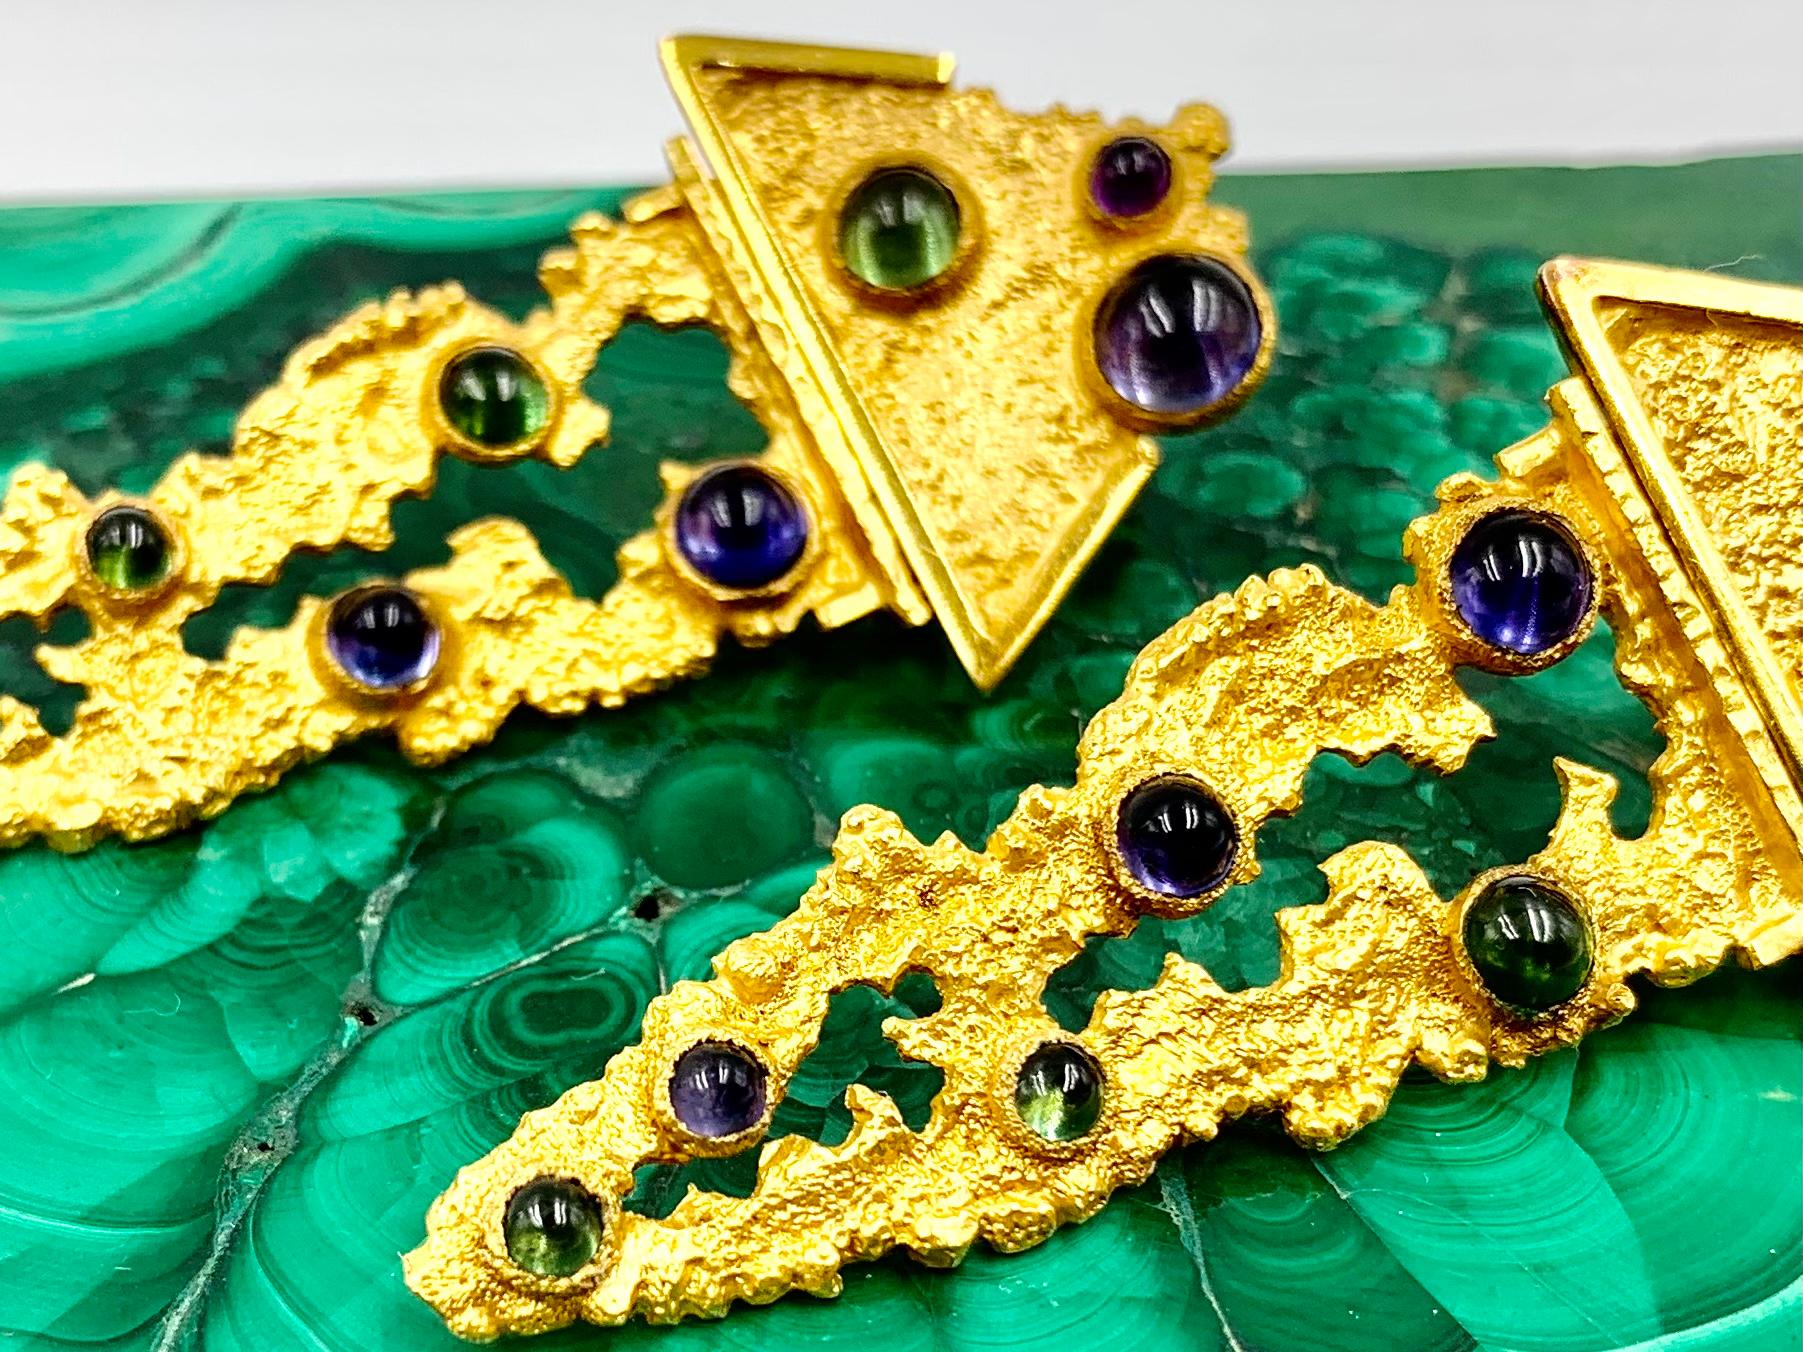 Modernist Organic Form F. Marshall 14k Gold Amethyst, Peridot Earrings, 1980's In Good Condition For Sale In New York, NY